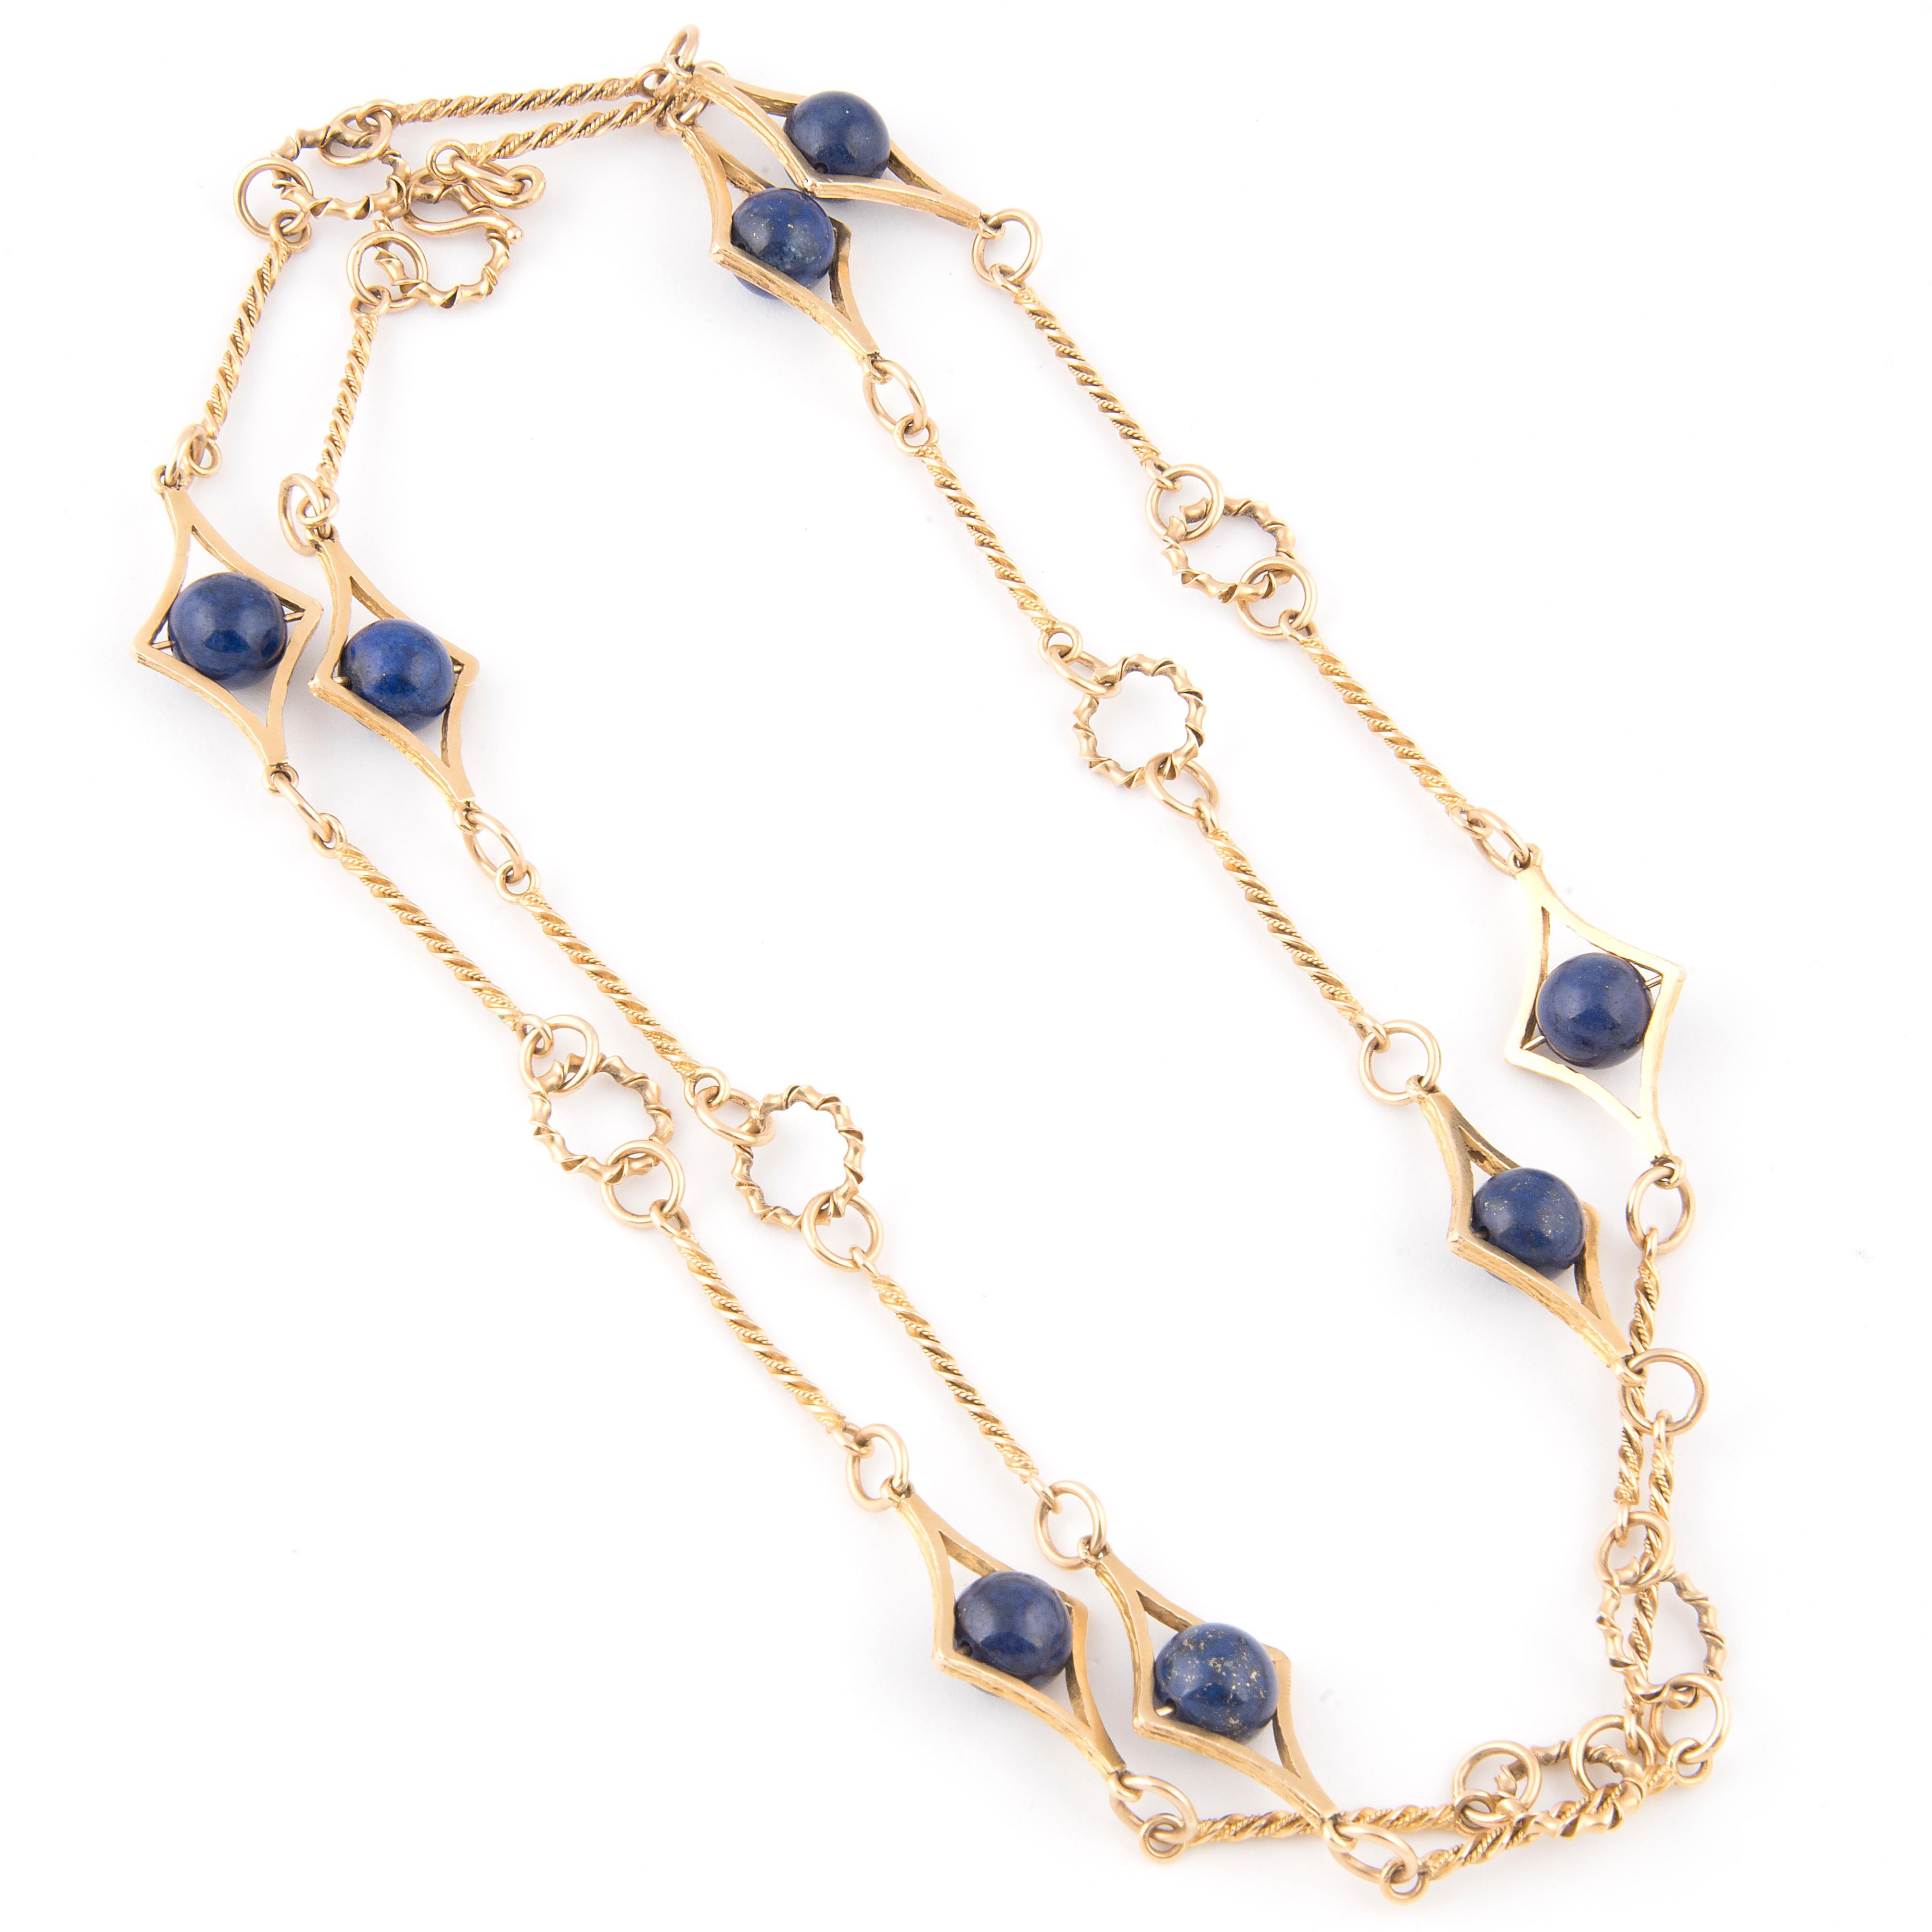 Women's 1970s 18k Yellow Gold and Lapis Lazuli Long Necklace For Sale